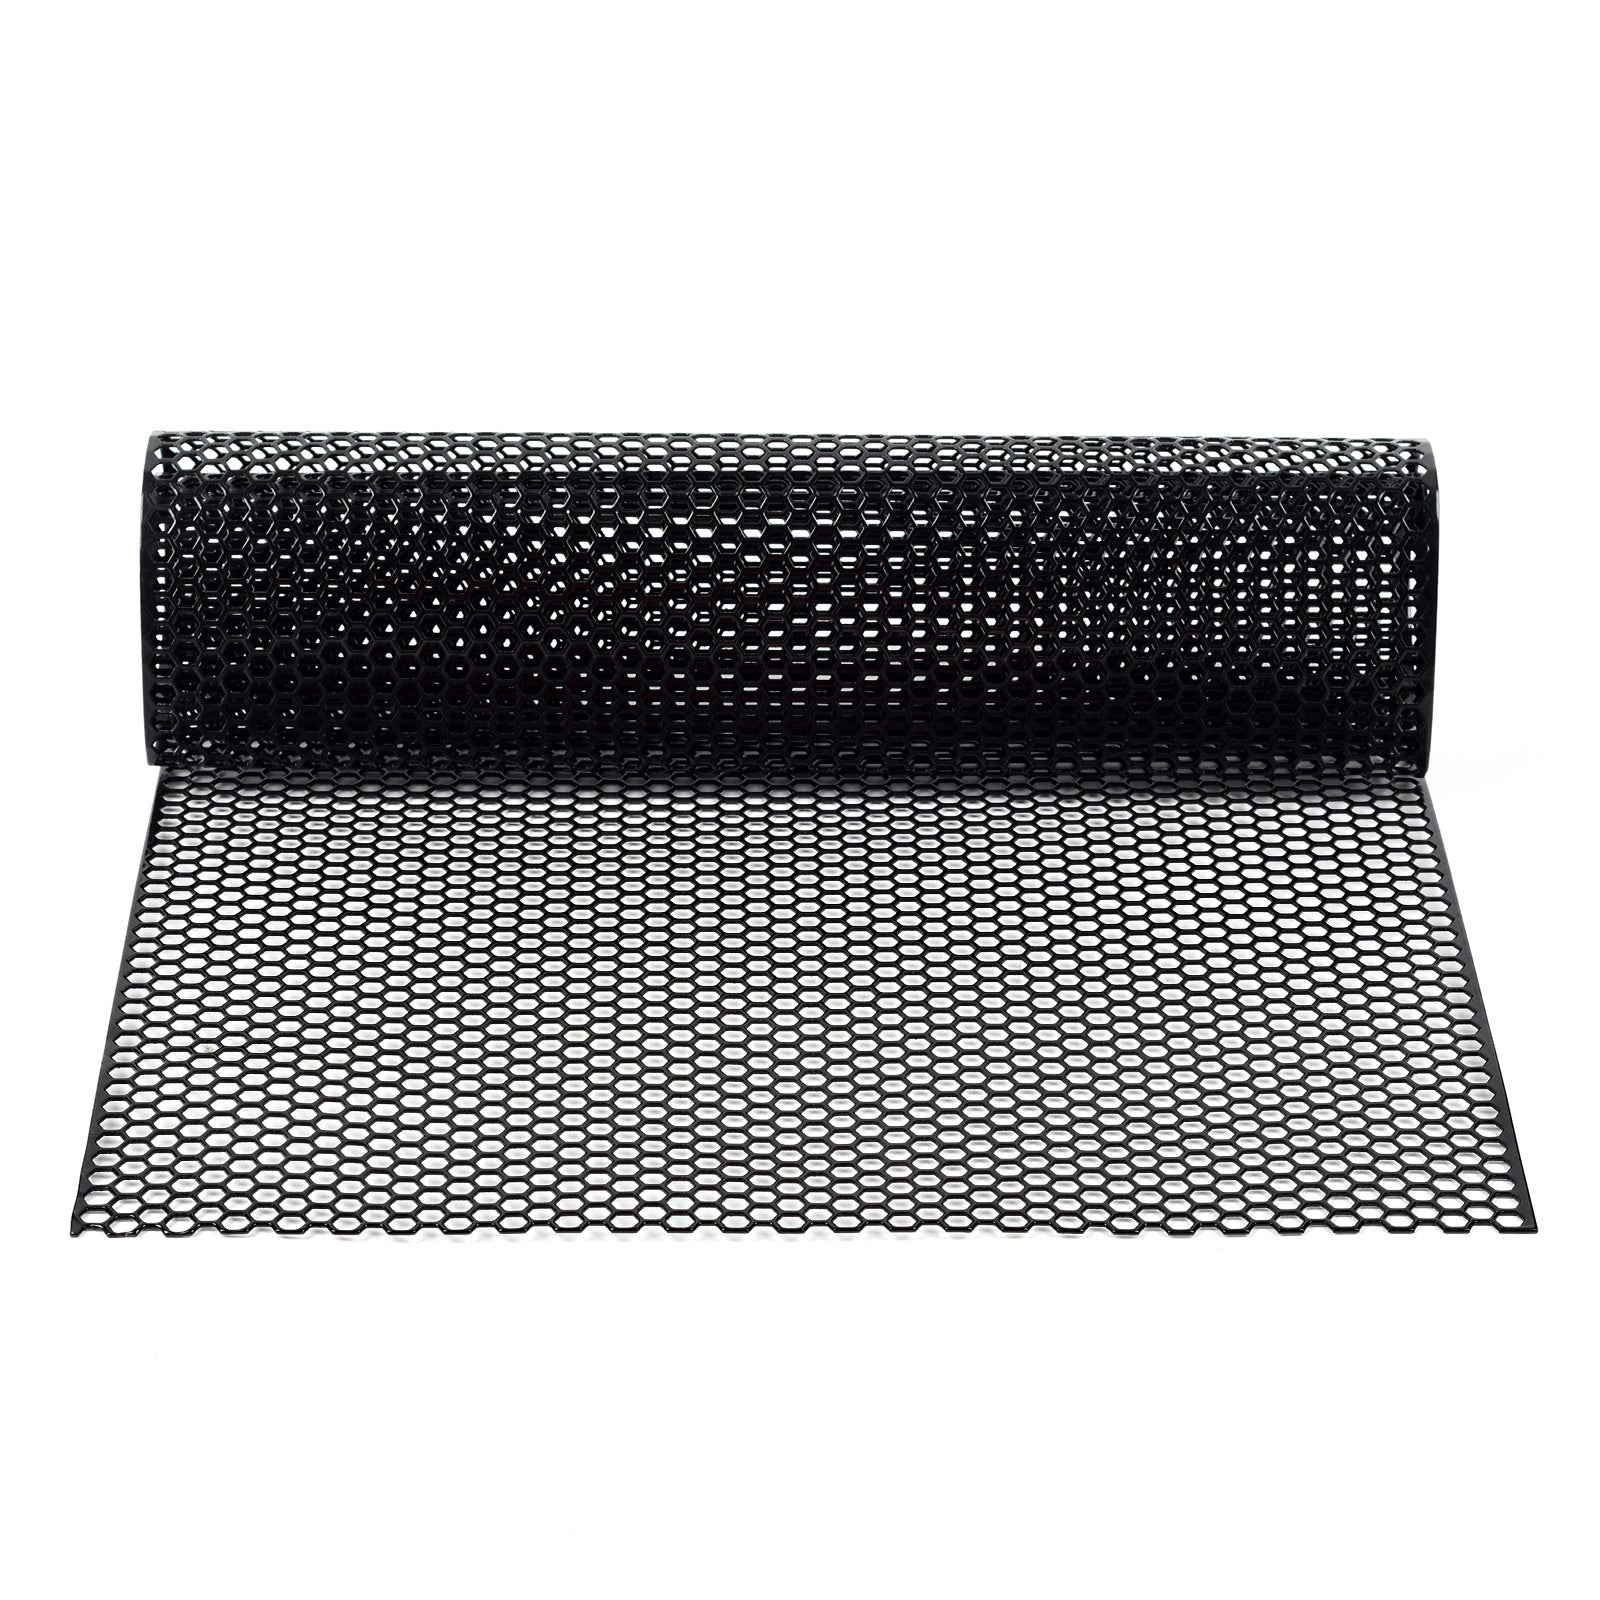 AggAuto Universal 40x13 Car Grill Mesh - 100x33cm Aluminum Alloy  Automotive Grille Insert Bumper 3x6mm Rhombic Hole, One of the Most  Multifunctional